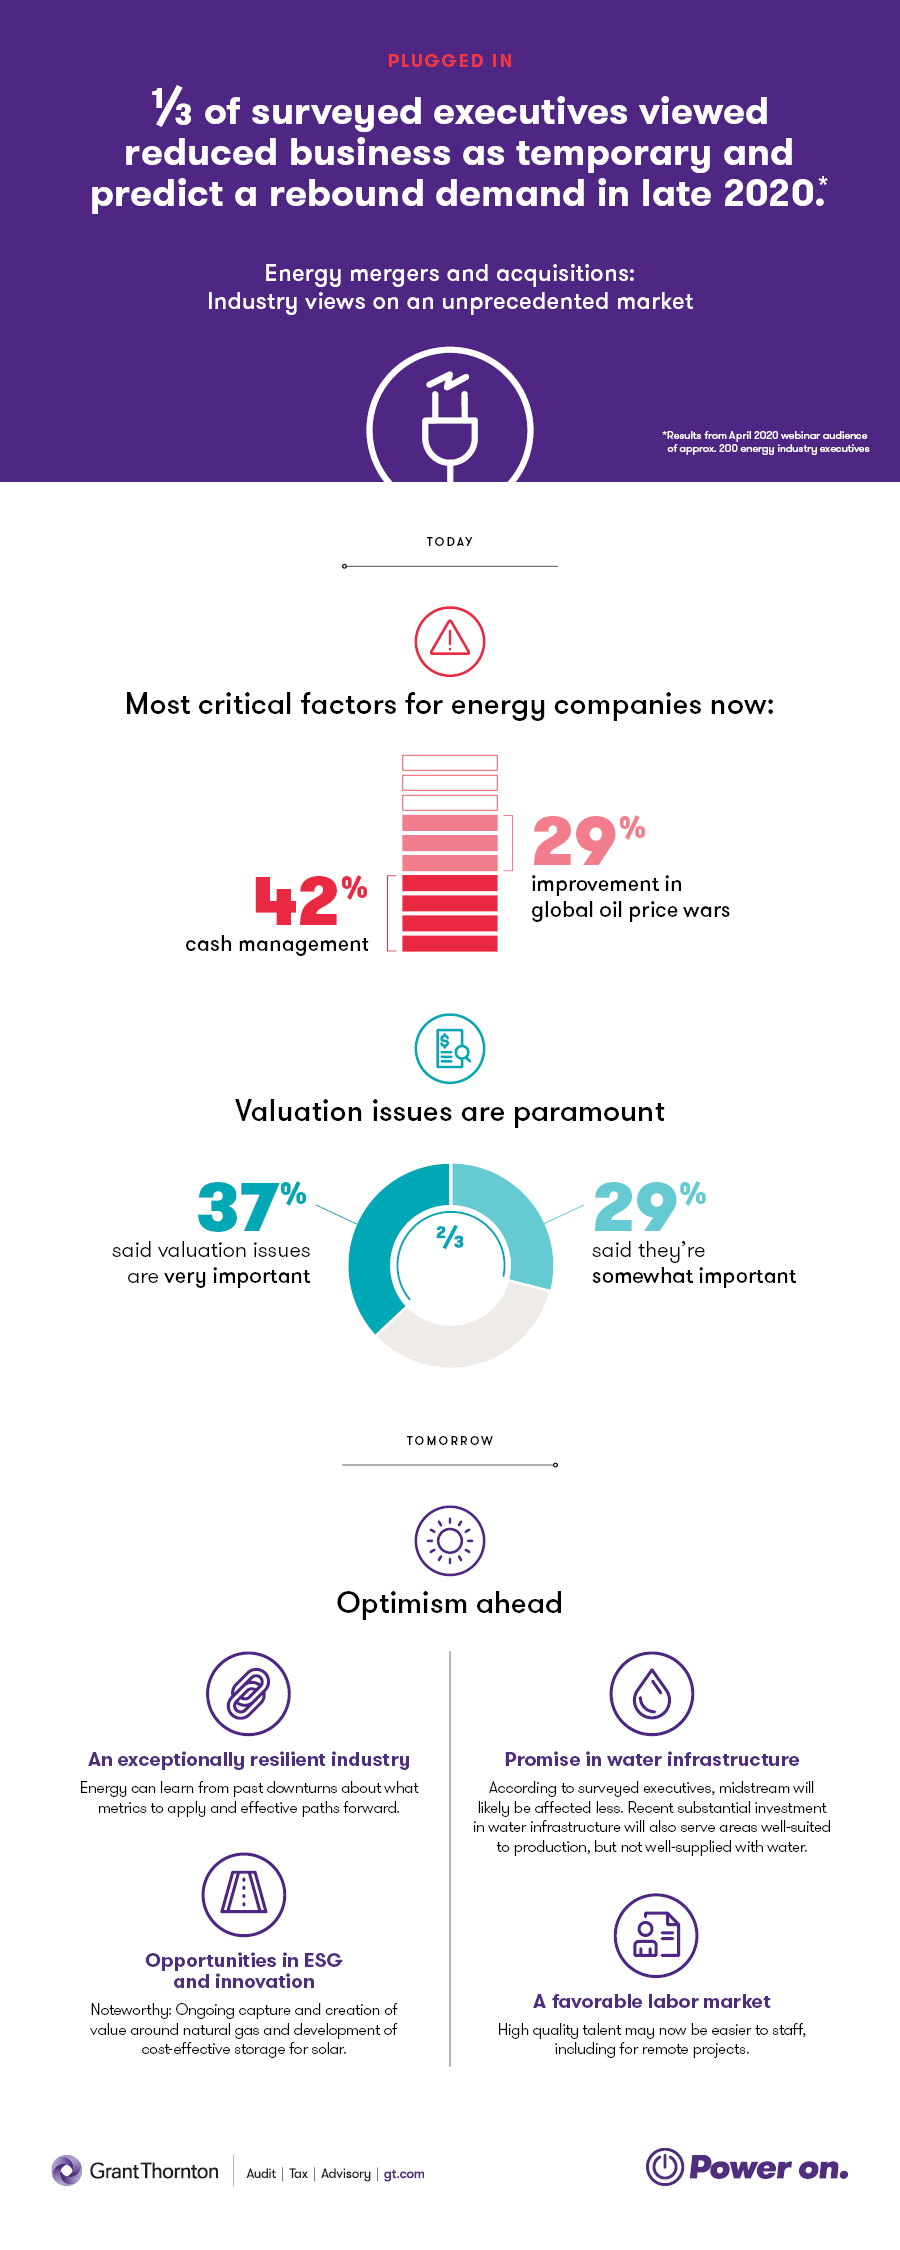 Most critical factors for energy companies now